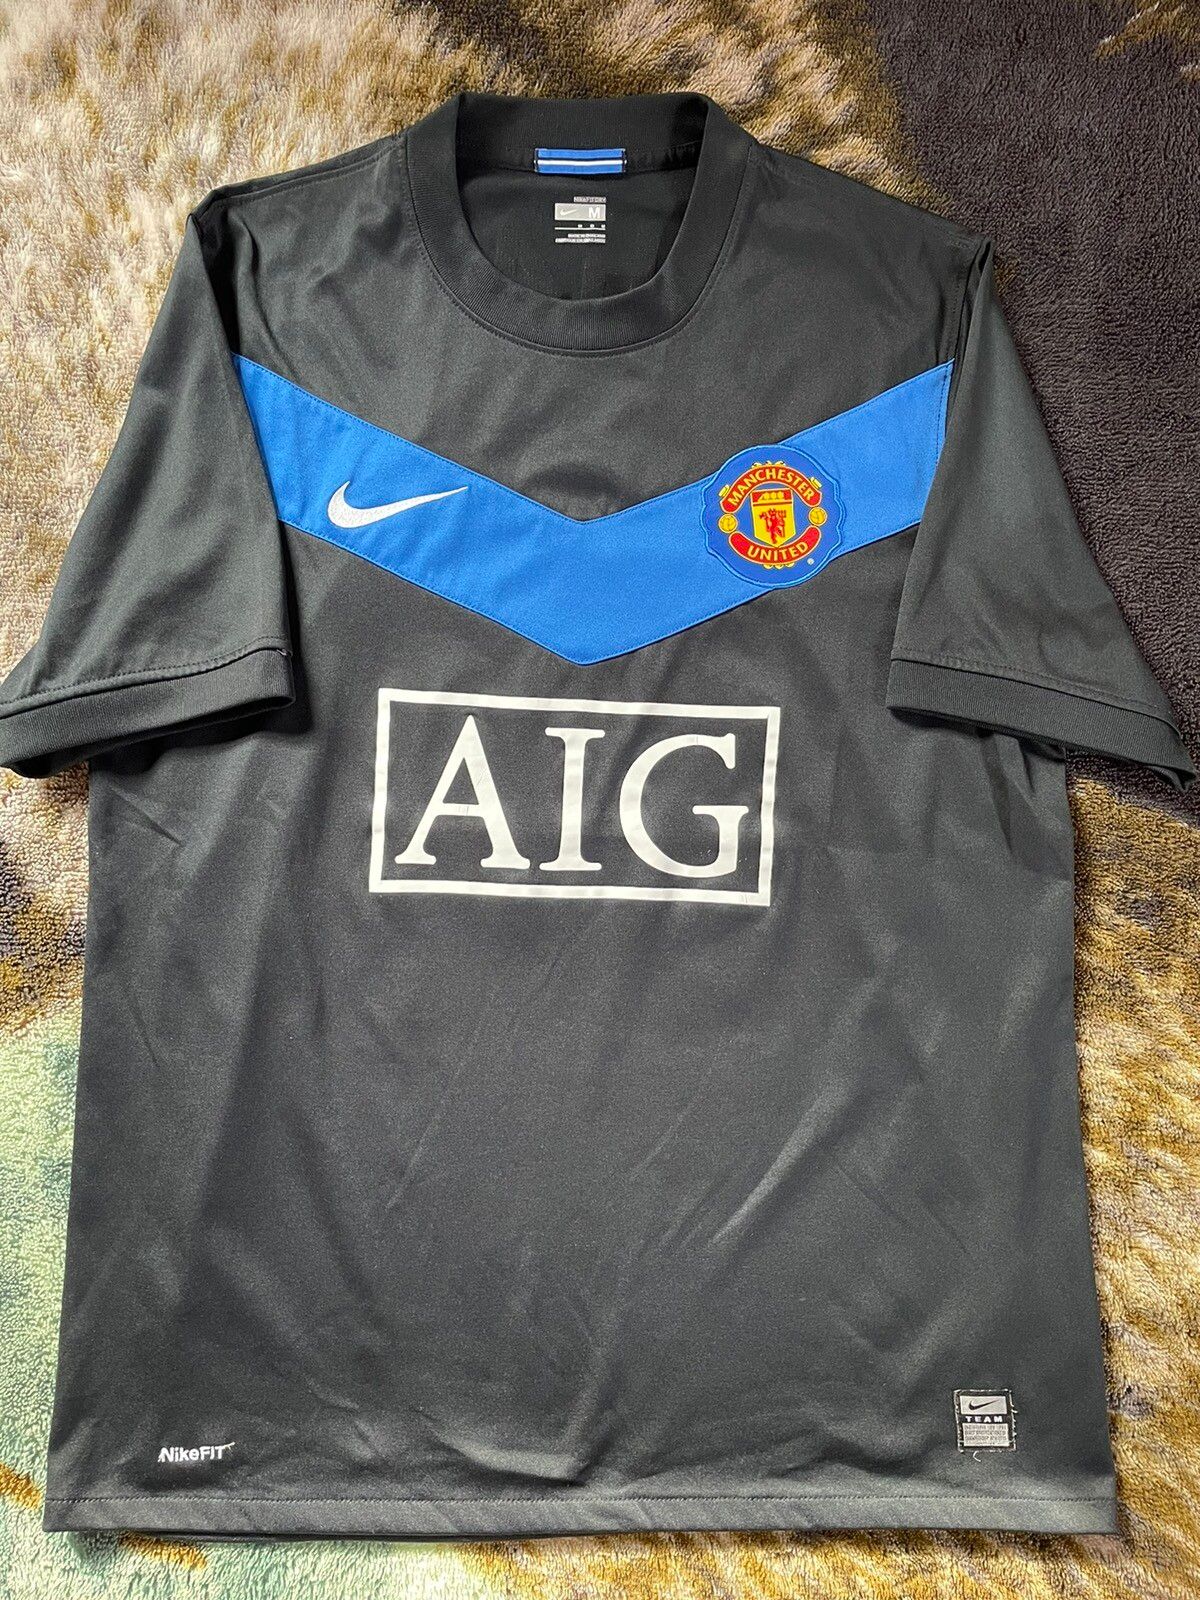 Nike 2009 NIKE MANCHESTER UNITED AIG CHICHARITO SOCCER JERSEY Size US M / EU 48-50 / 2 - 2 Preview